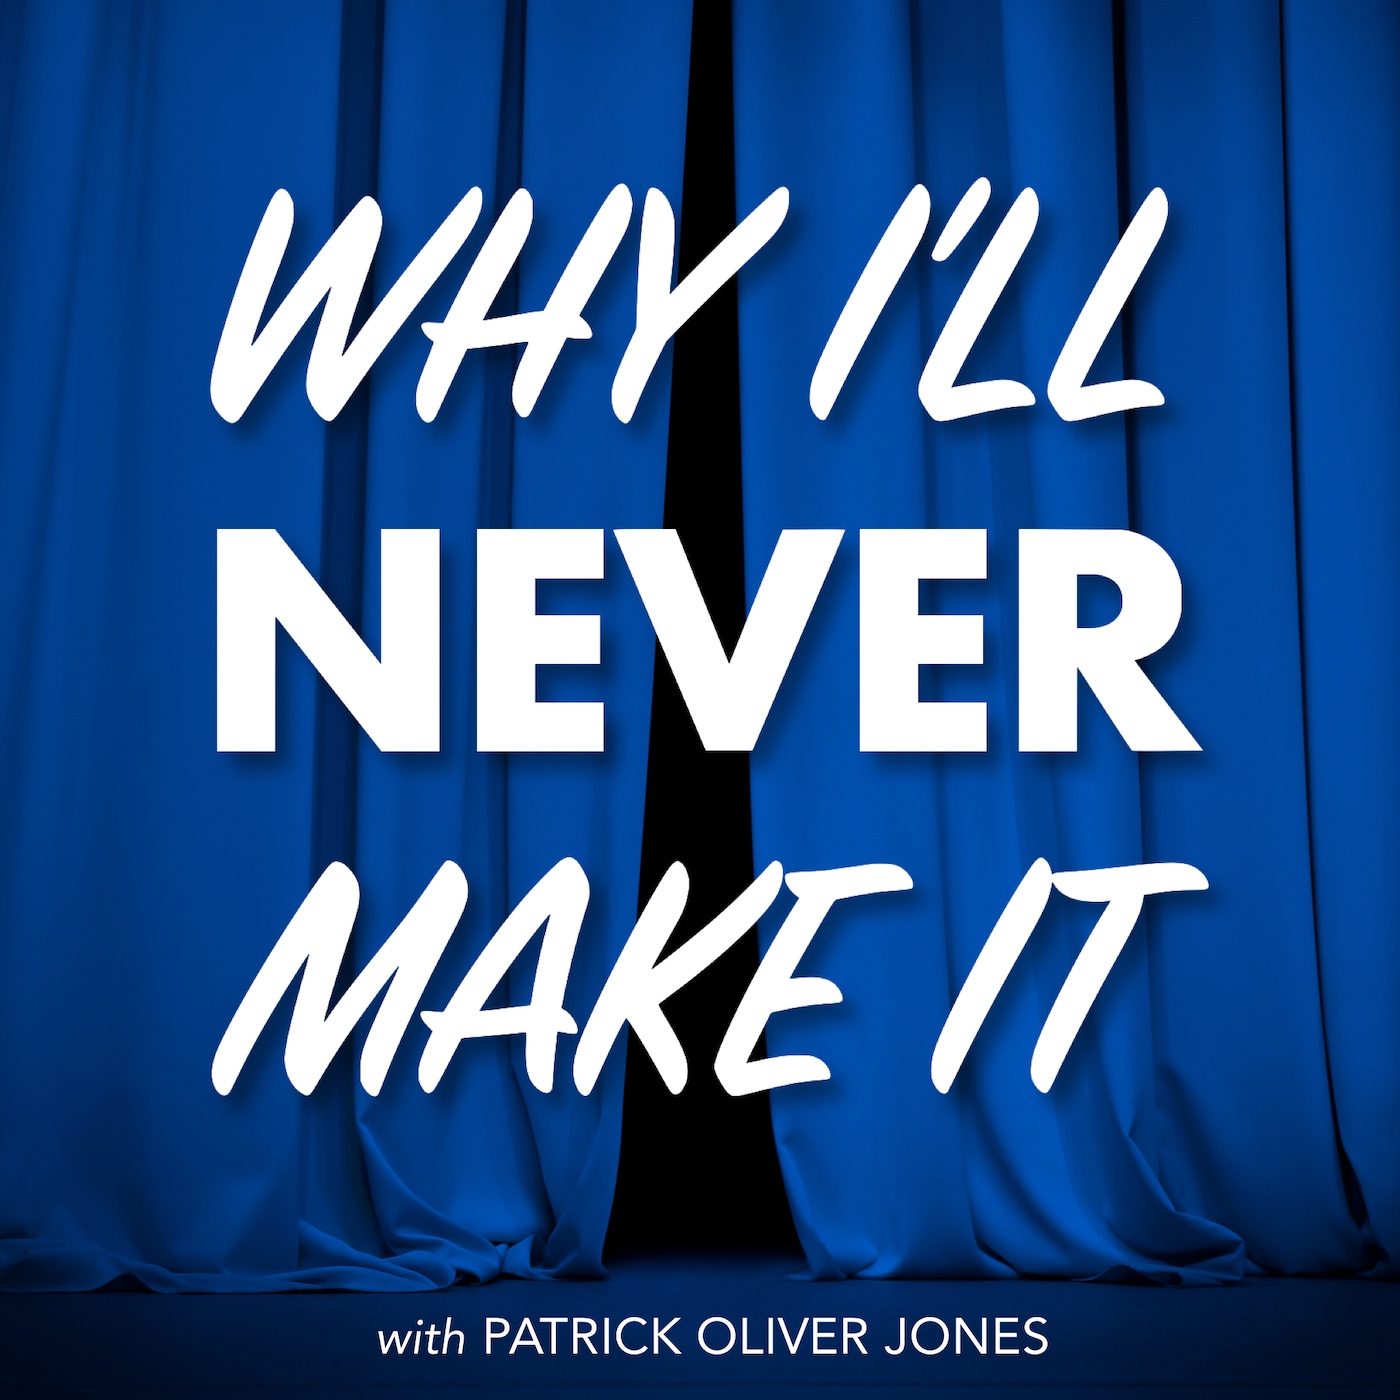 Why I'll Never Make It - An Actor's Journey